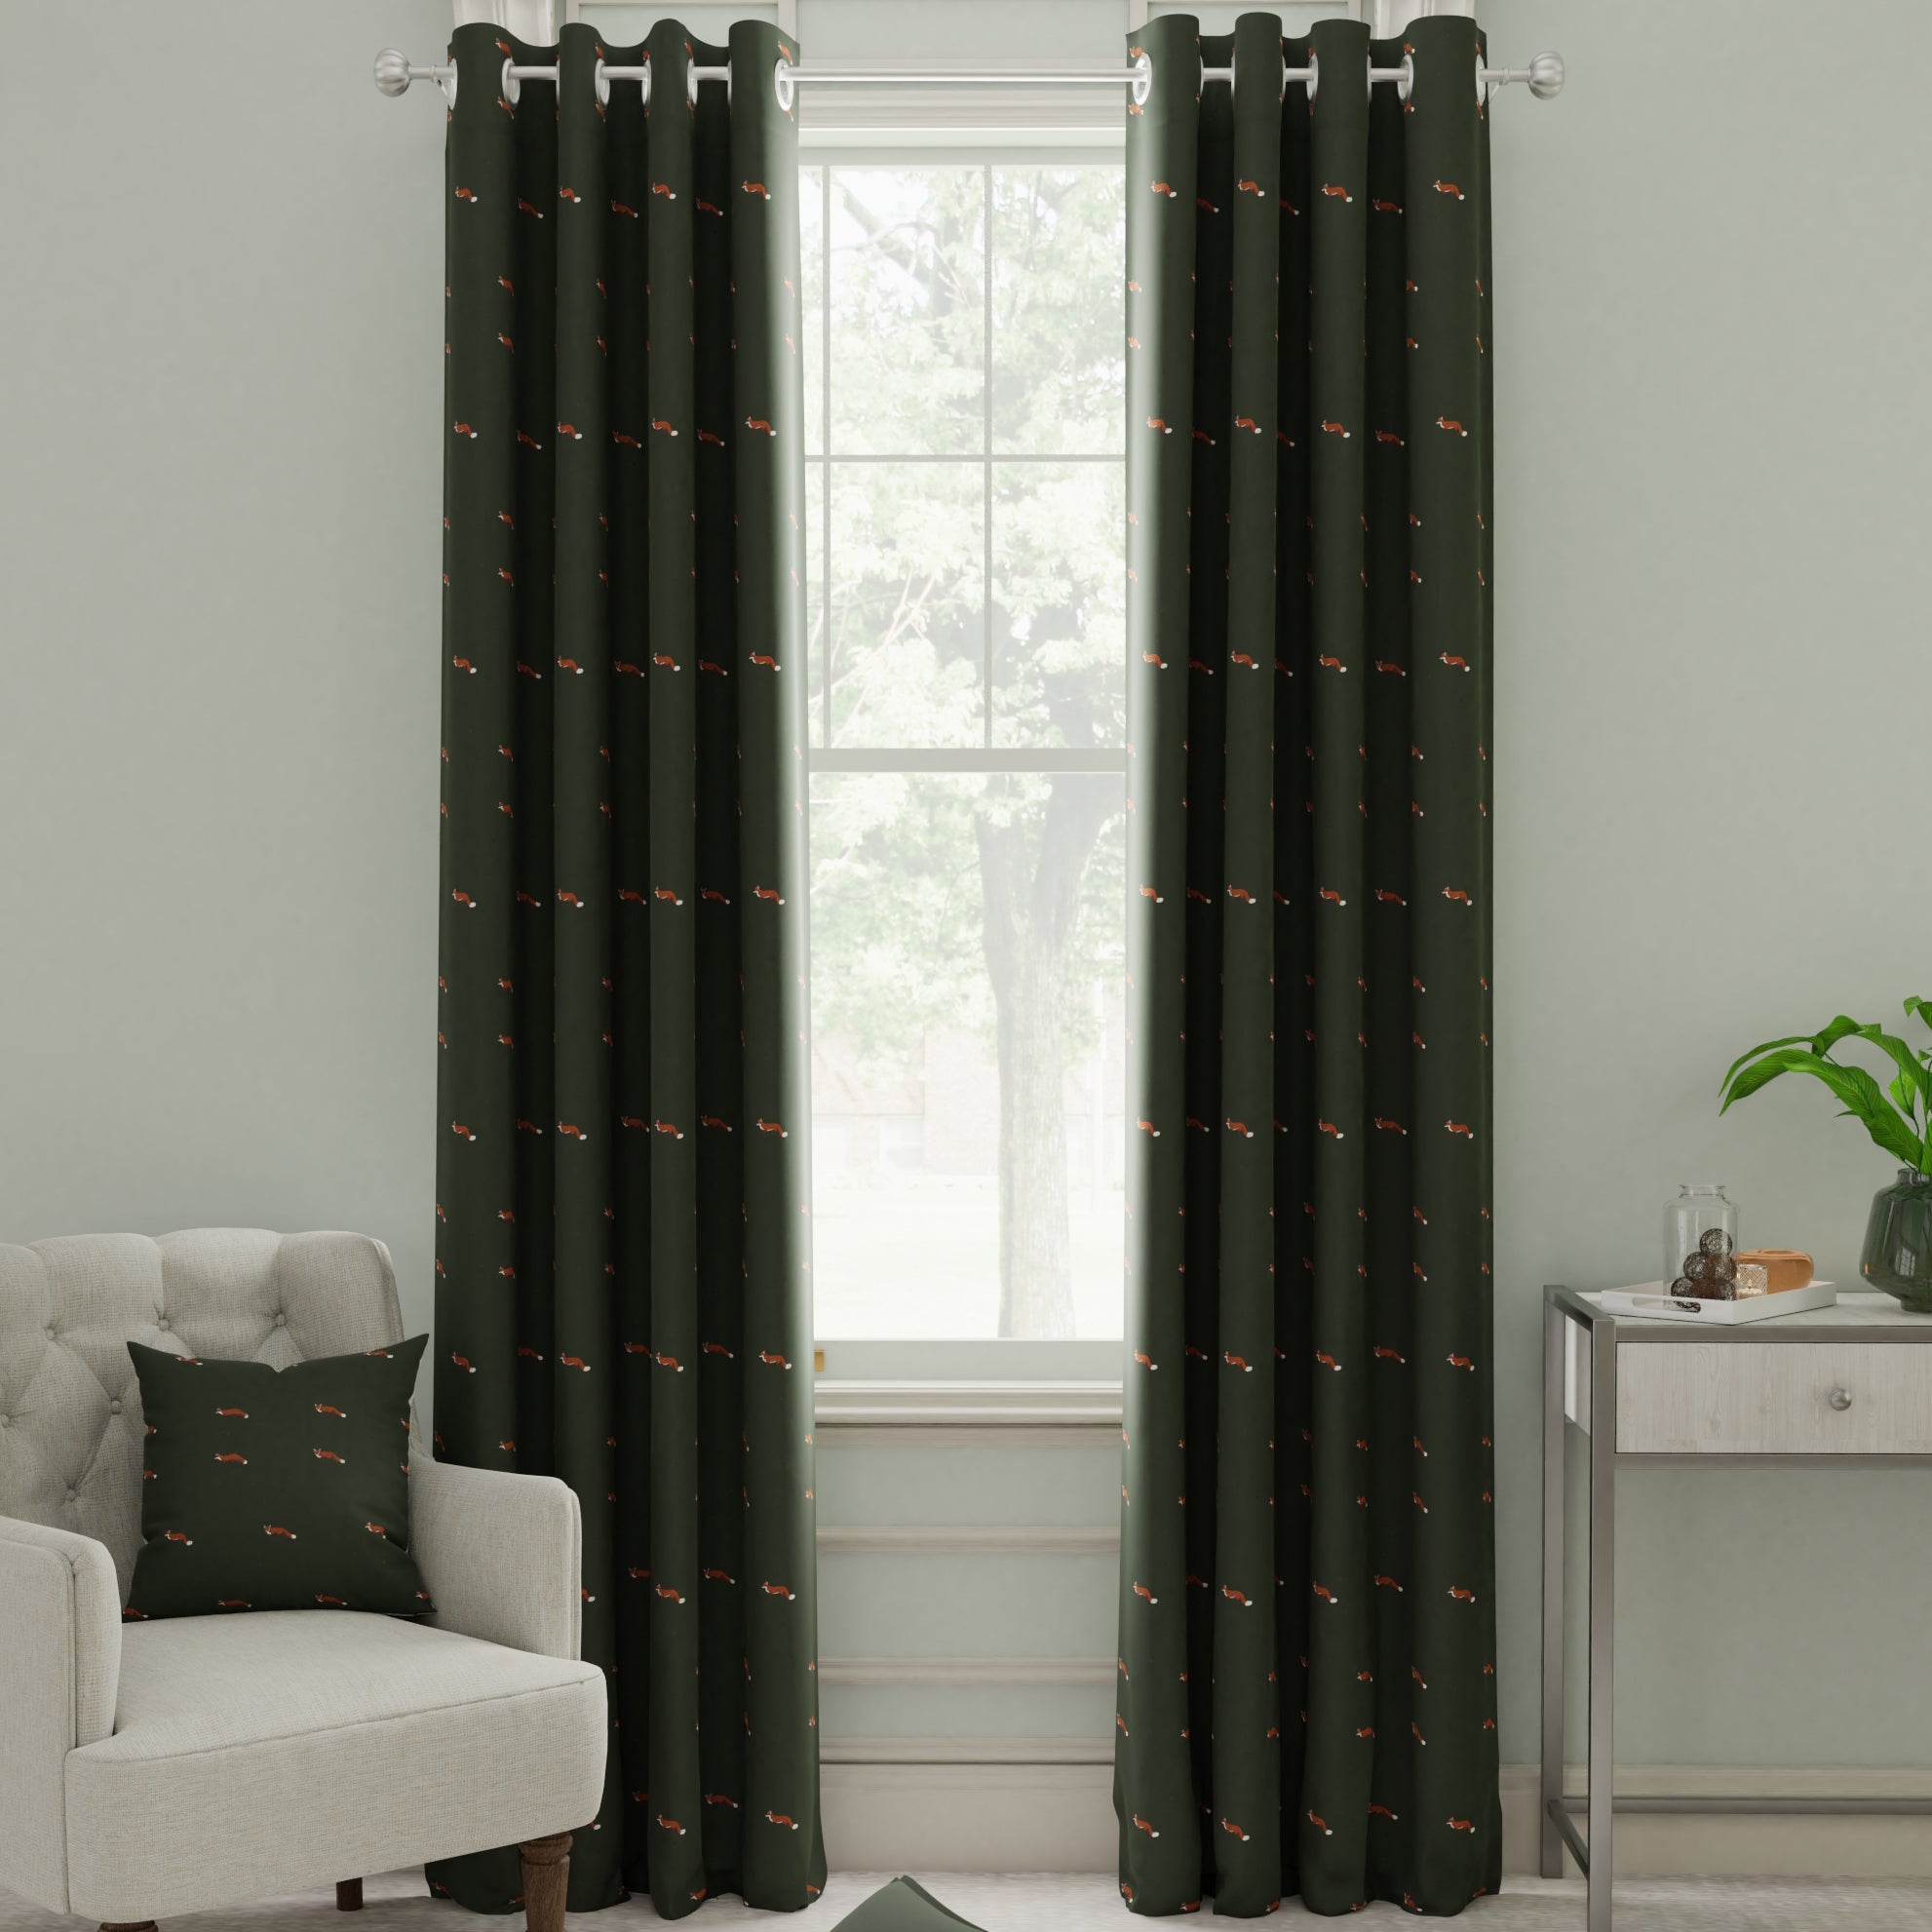 Sophie Allport Foxes Made To Measure Curtains Forest Green